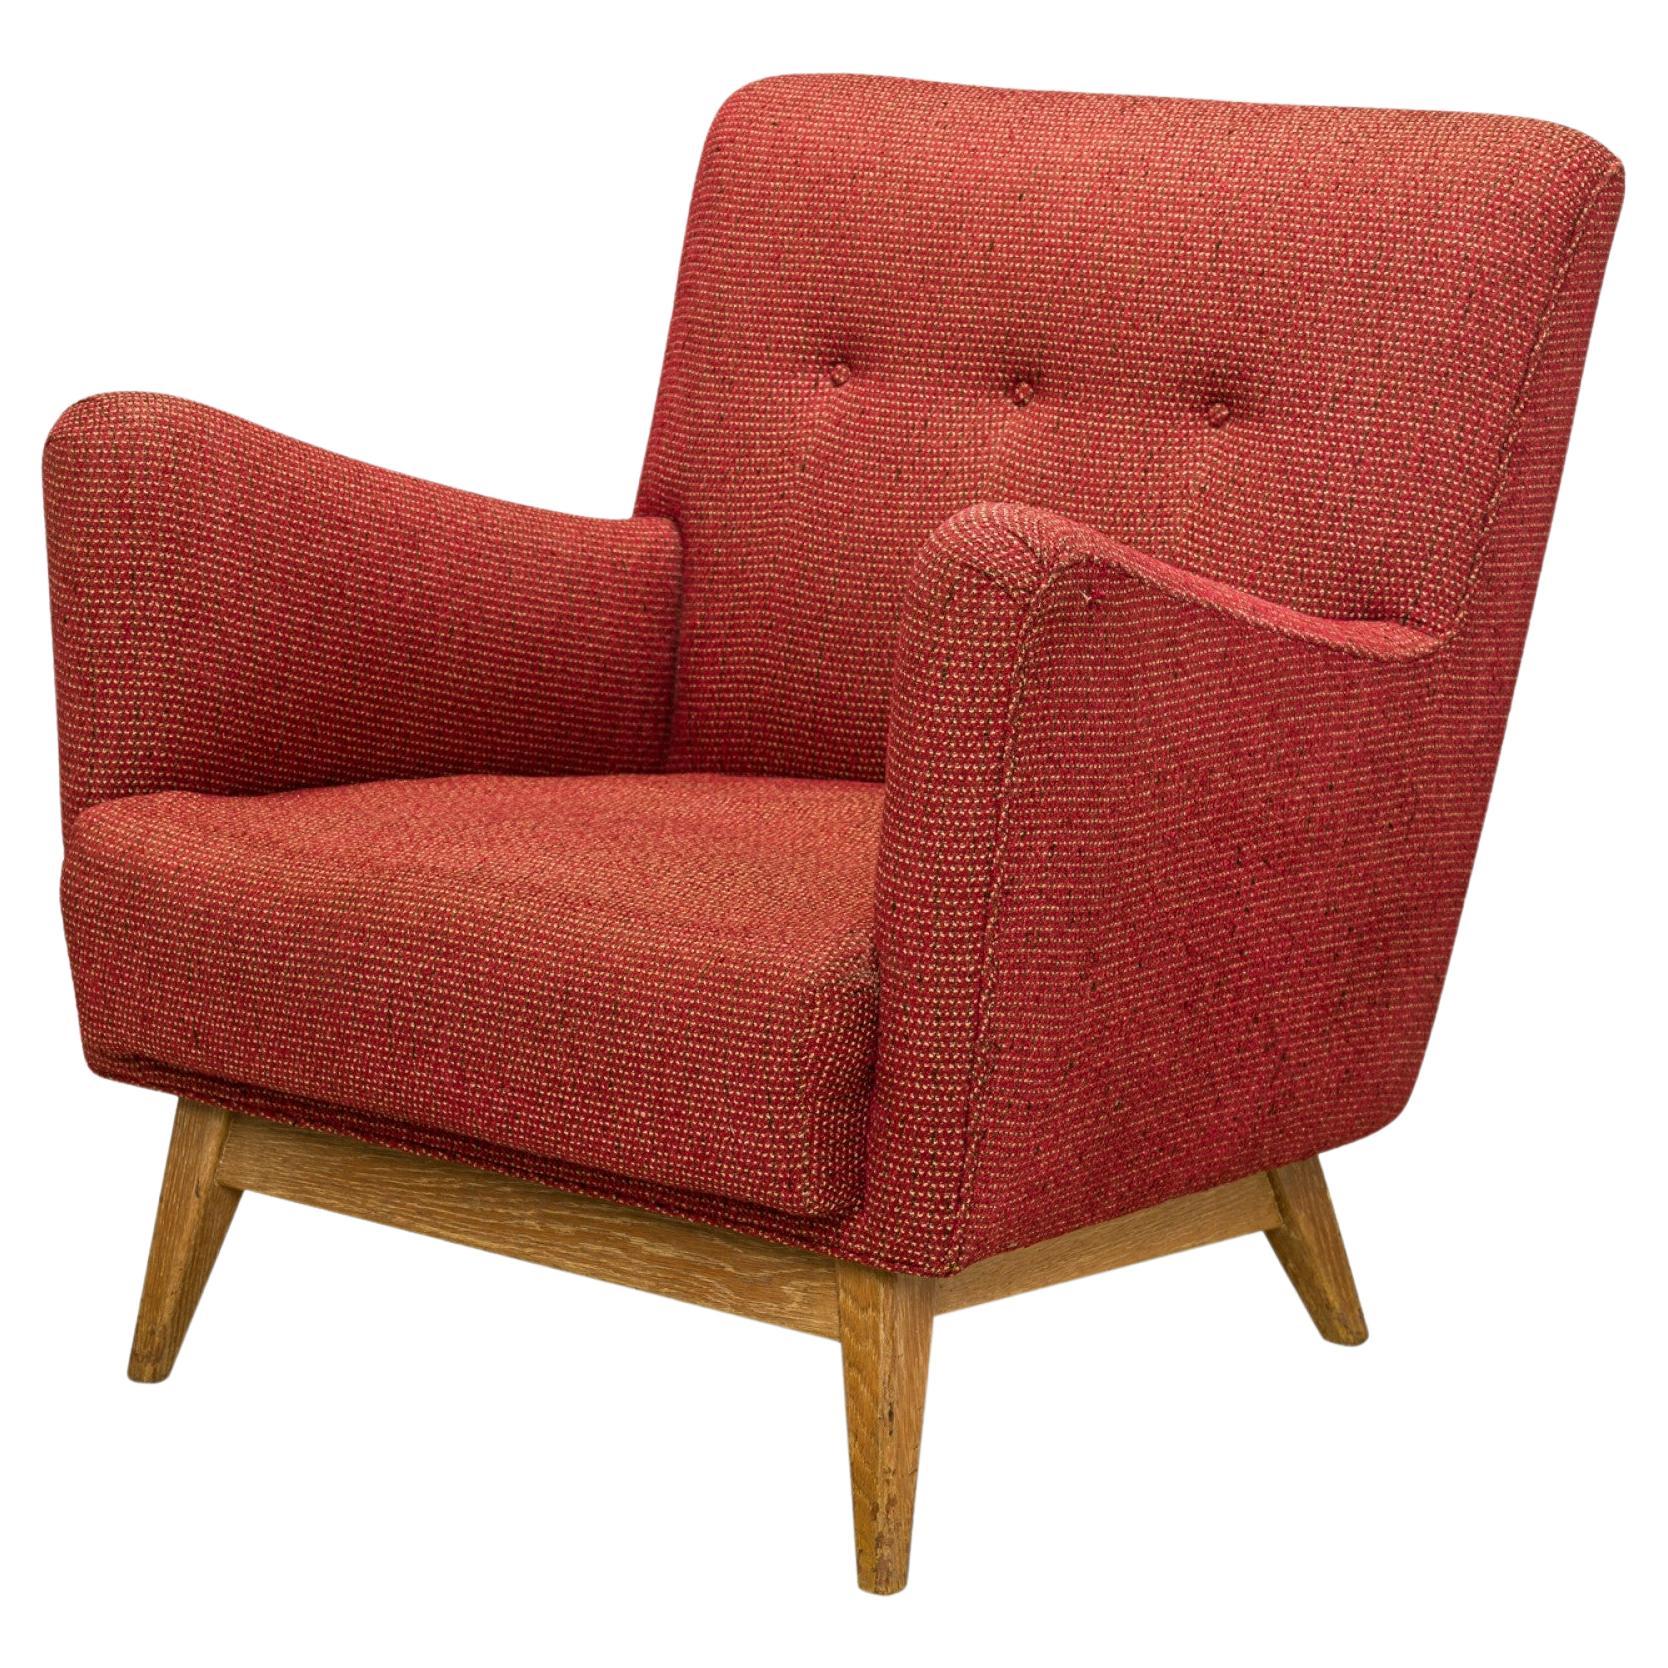 Jens Risom Red Woven Fabric Upholstered Lounge Armchair For Sale